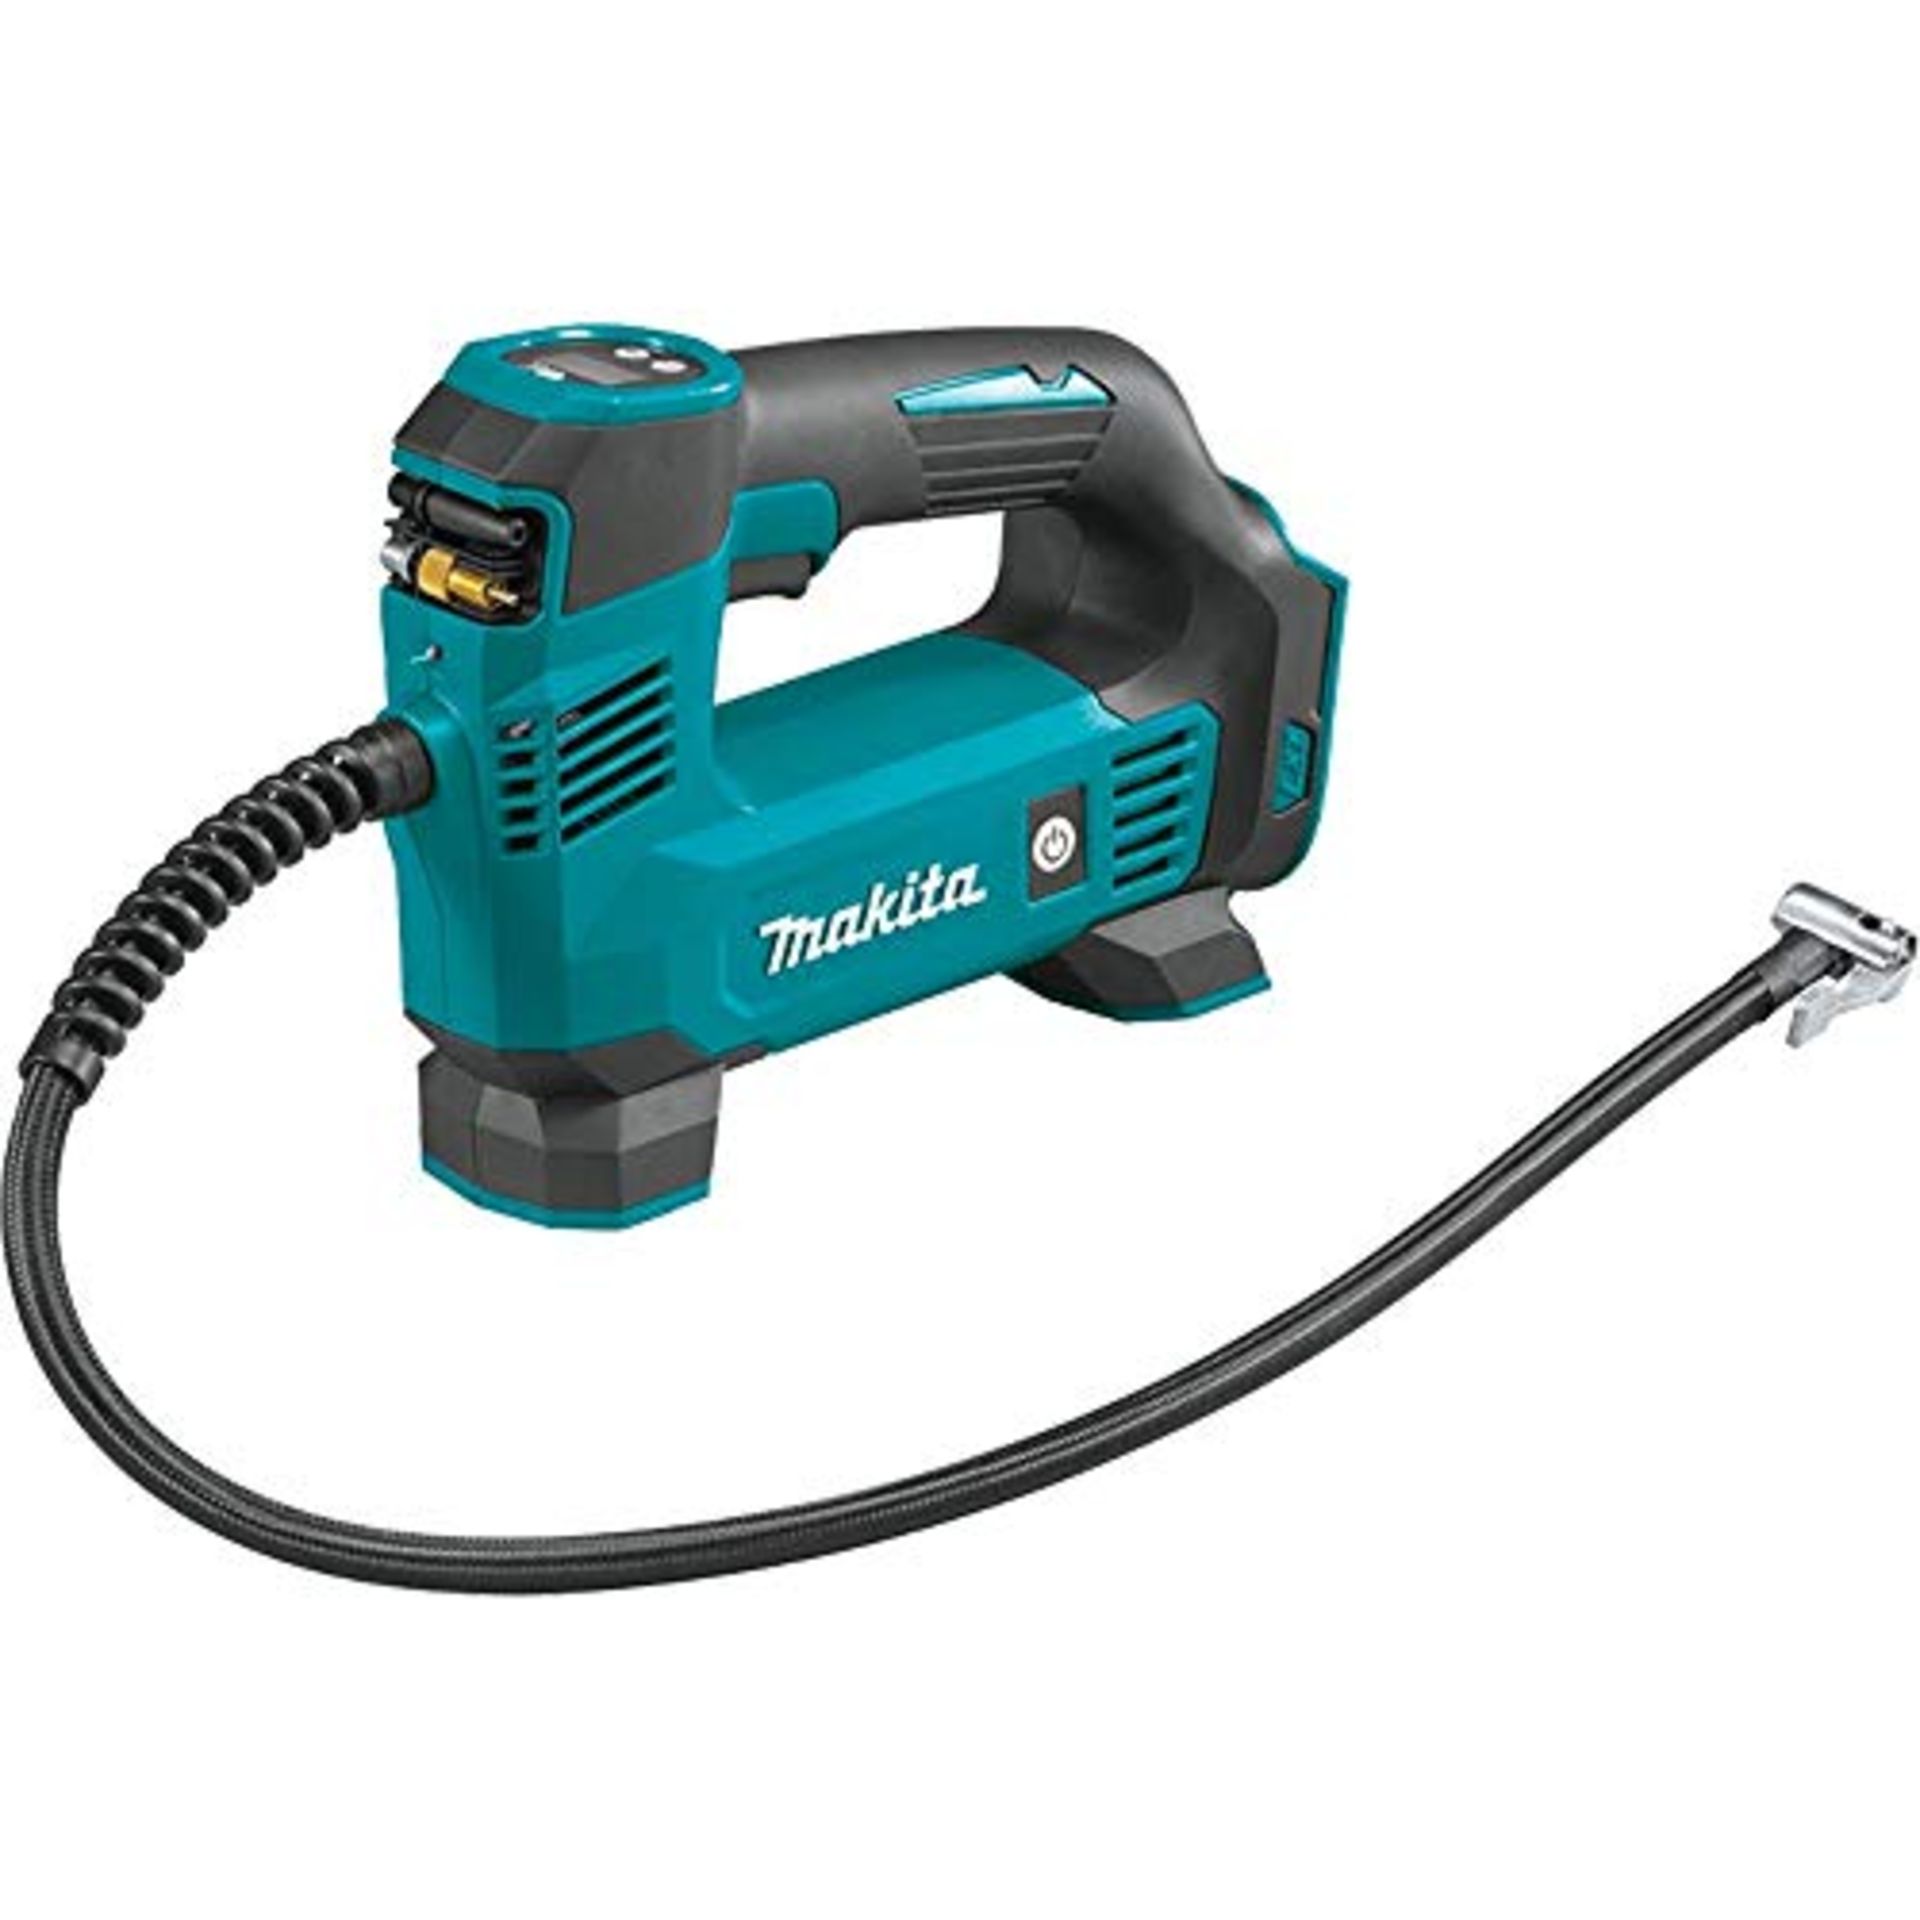 Makita DMP180Z 18V Li-ion LXT Inflator - Batteries and Charger Not Included, Blue/Silv - Image 3 of 10